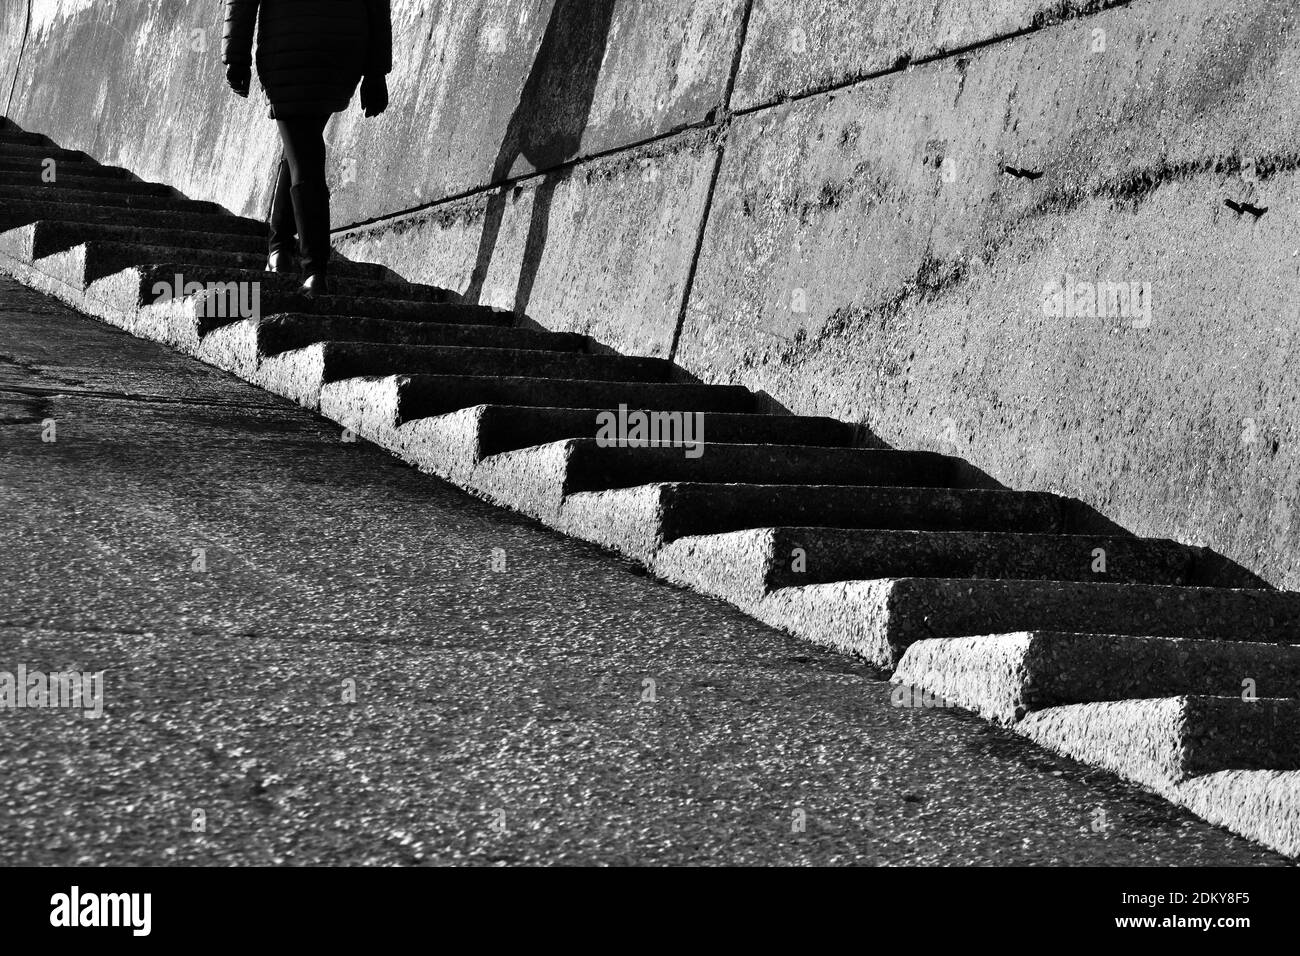 Silhouette of woman walking up steps near seawall during lockdown in black and white Stock Photo